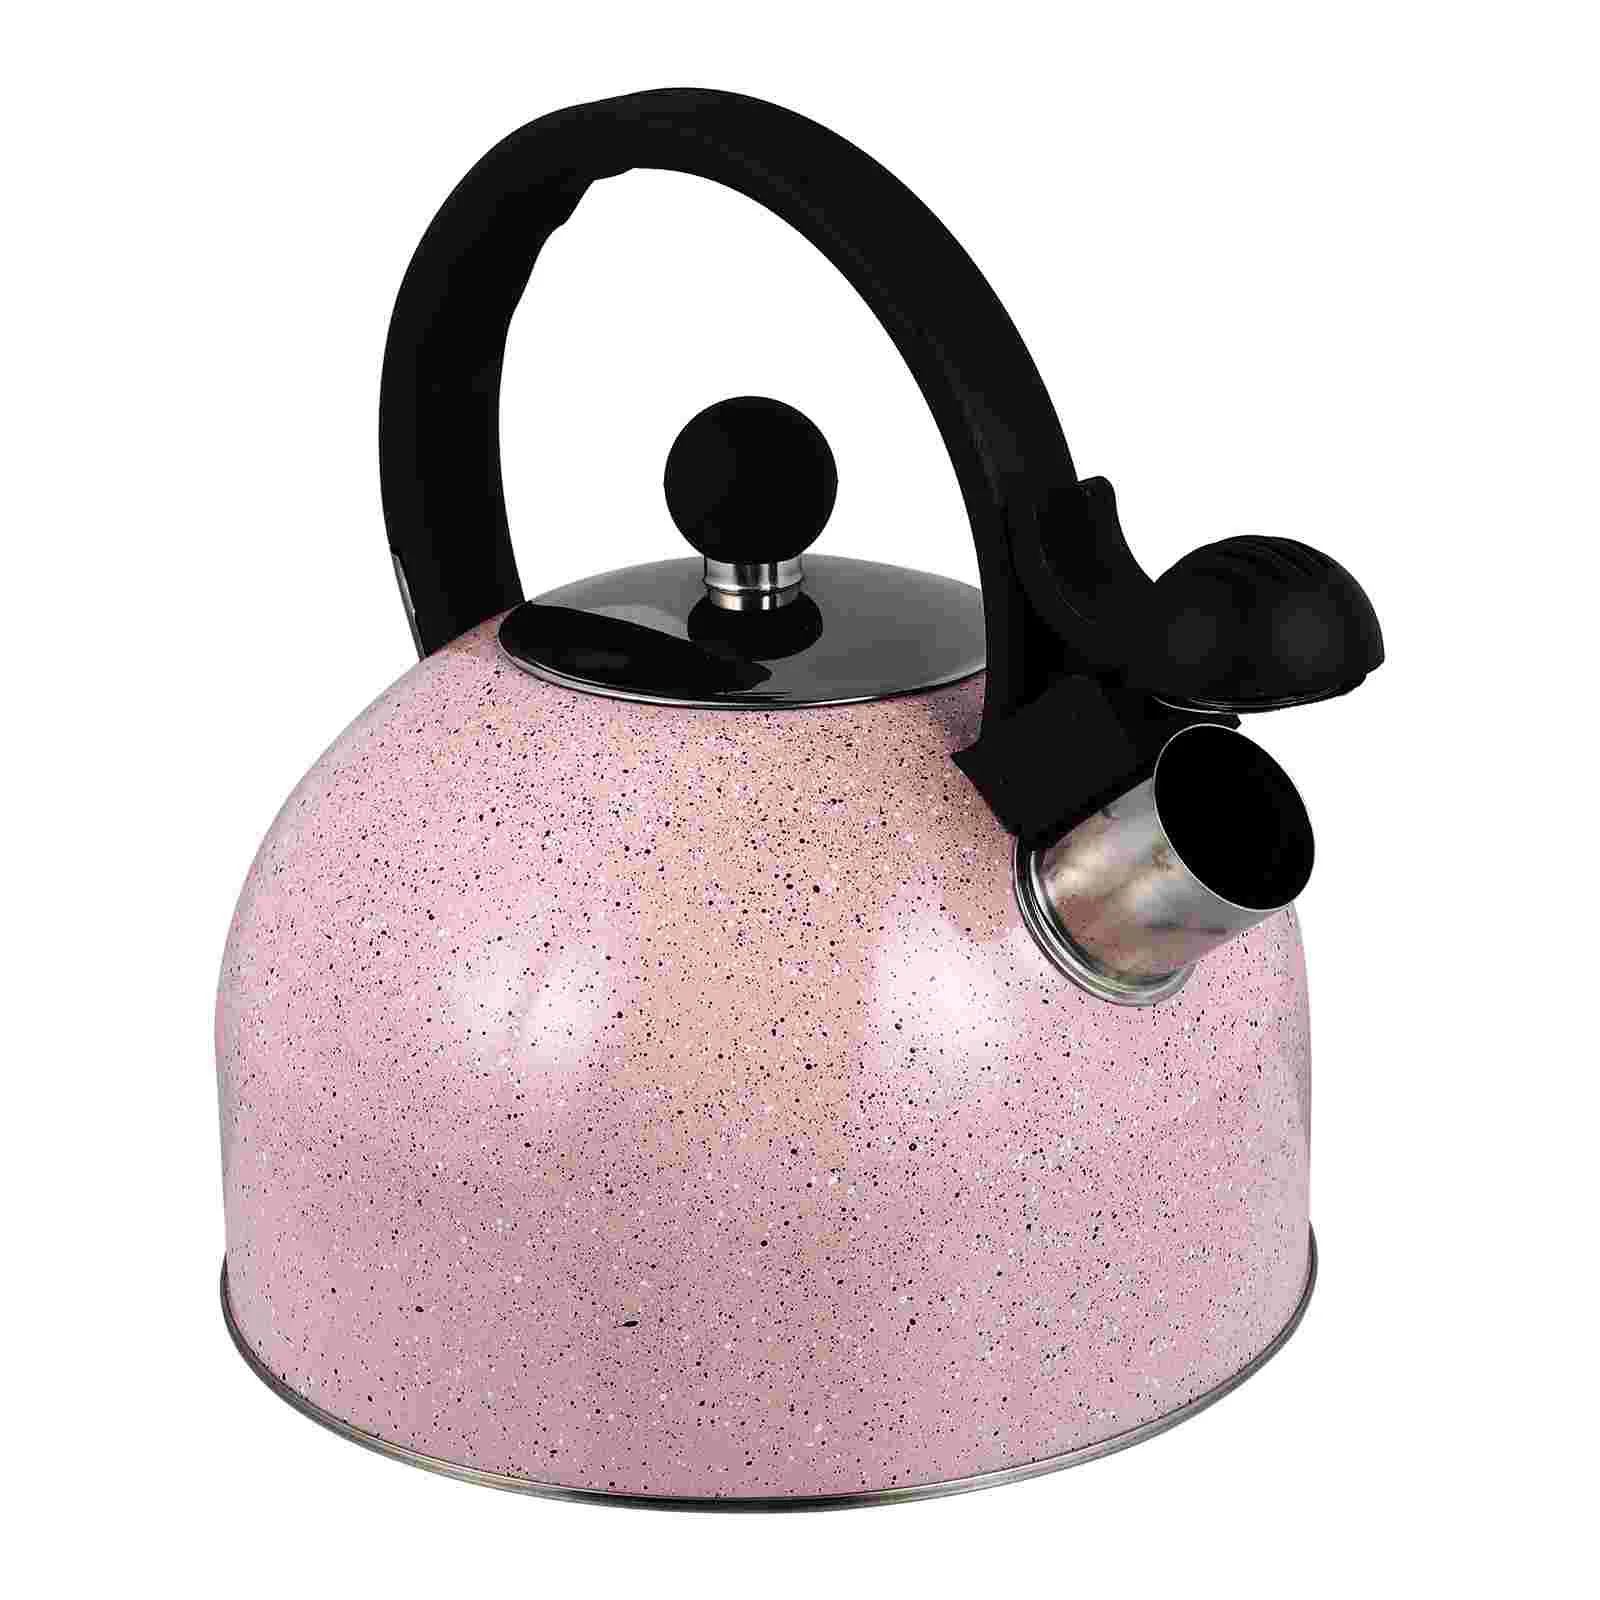 

Kettle Water Tea Pot Boiling Teapot Whistling Heater Electric Sounding Stovetop Teakettle Portable Coffee Steel Stainless Voice